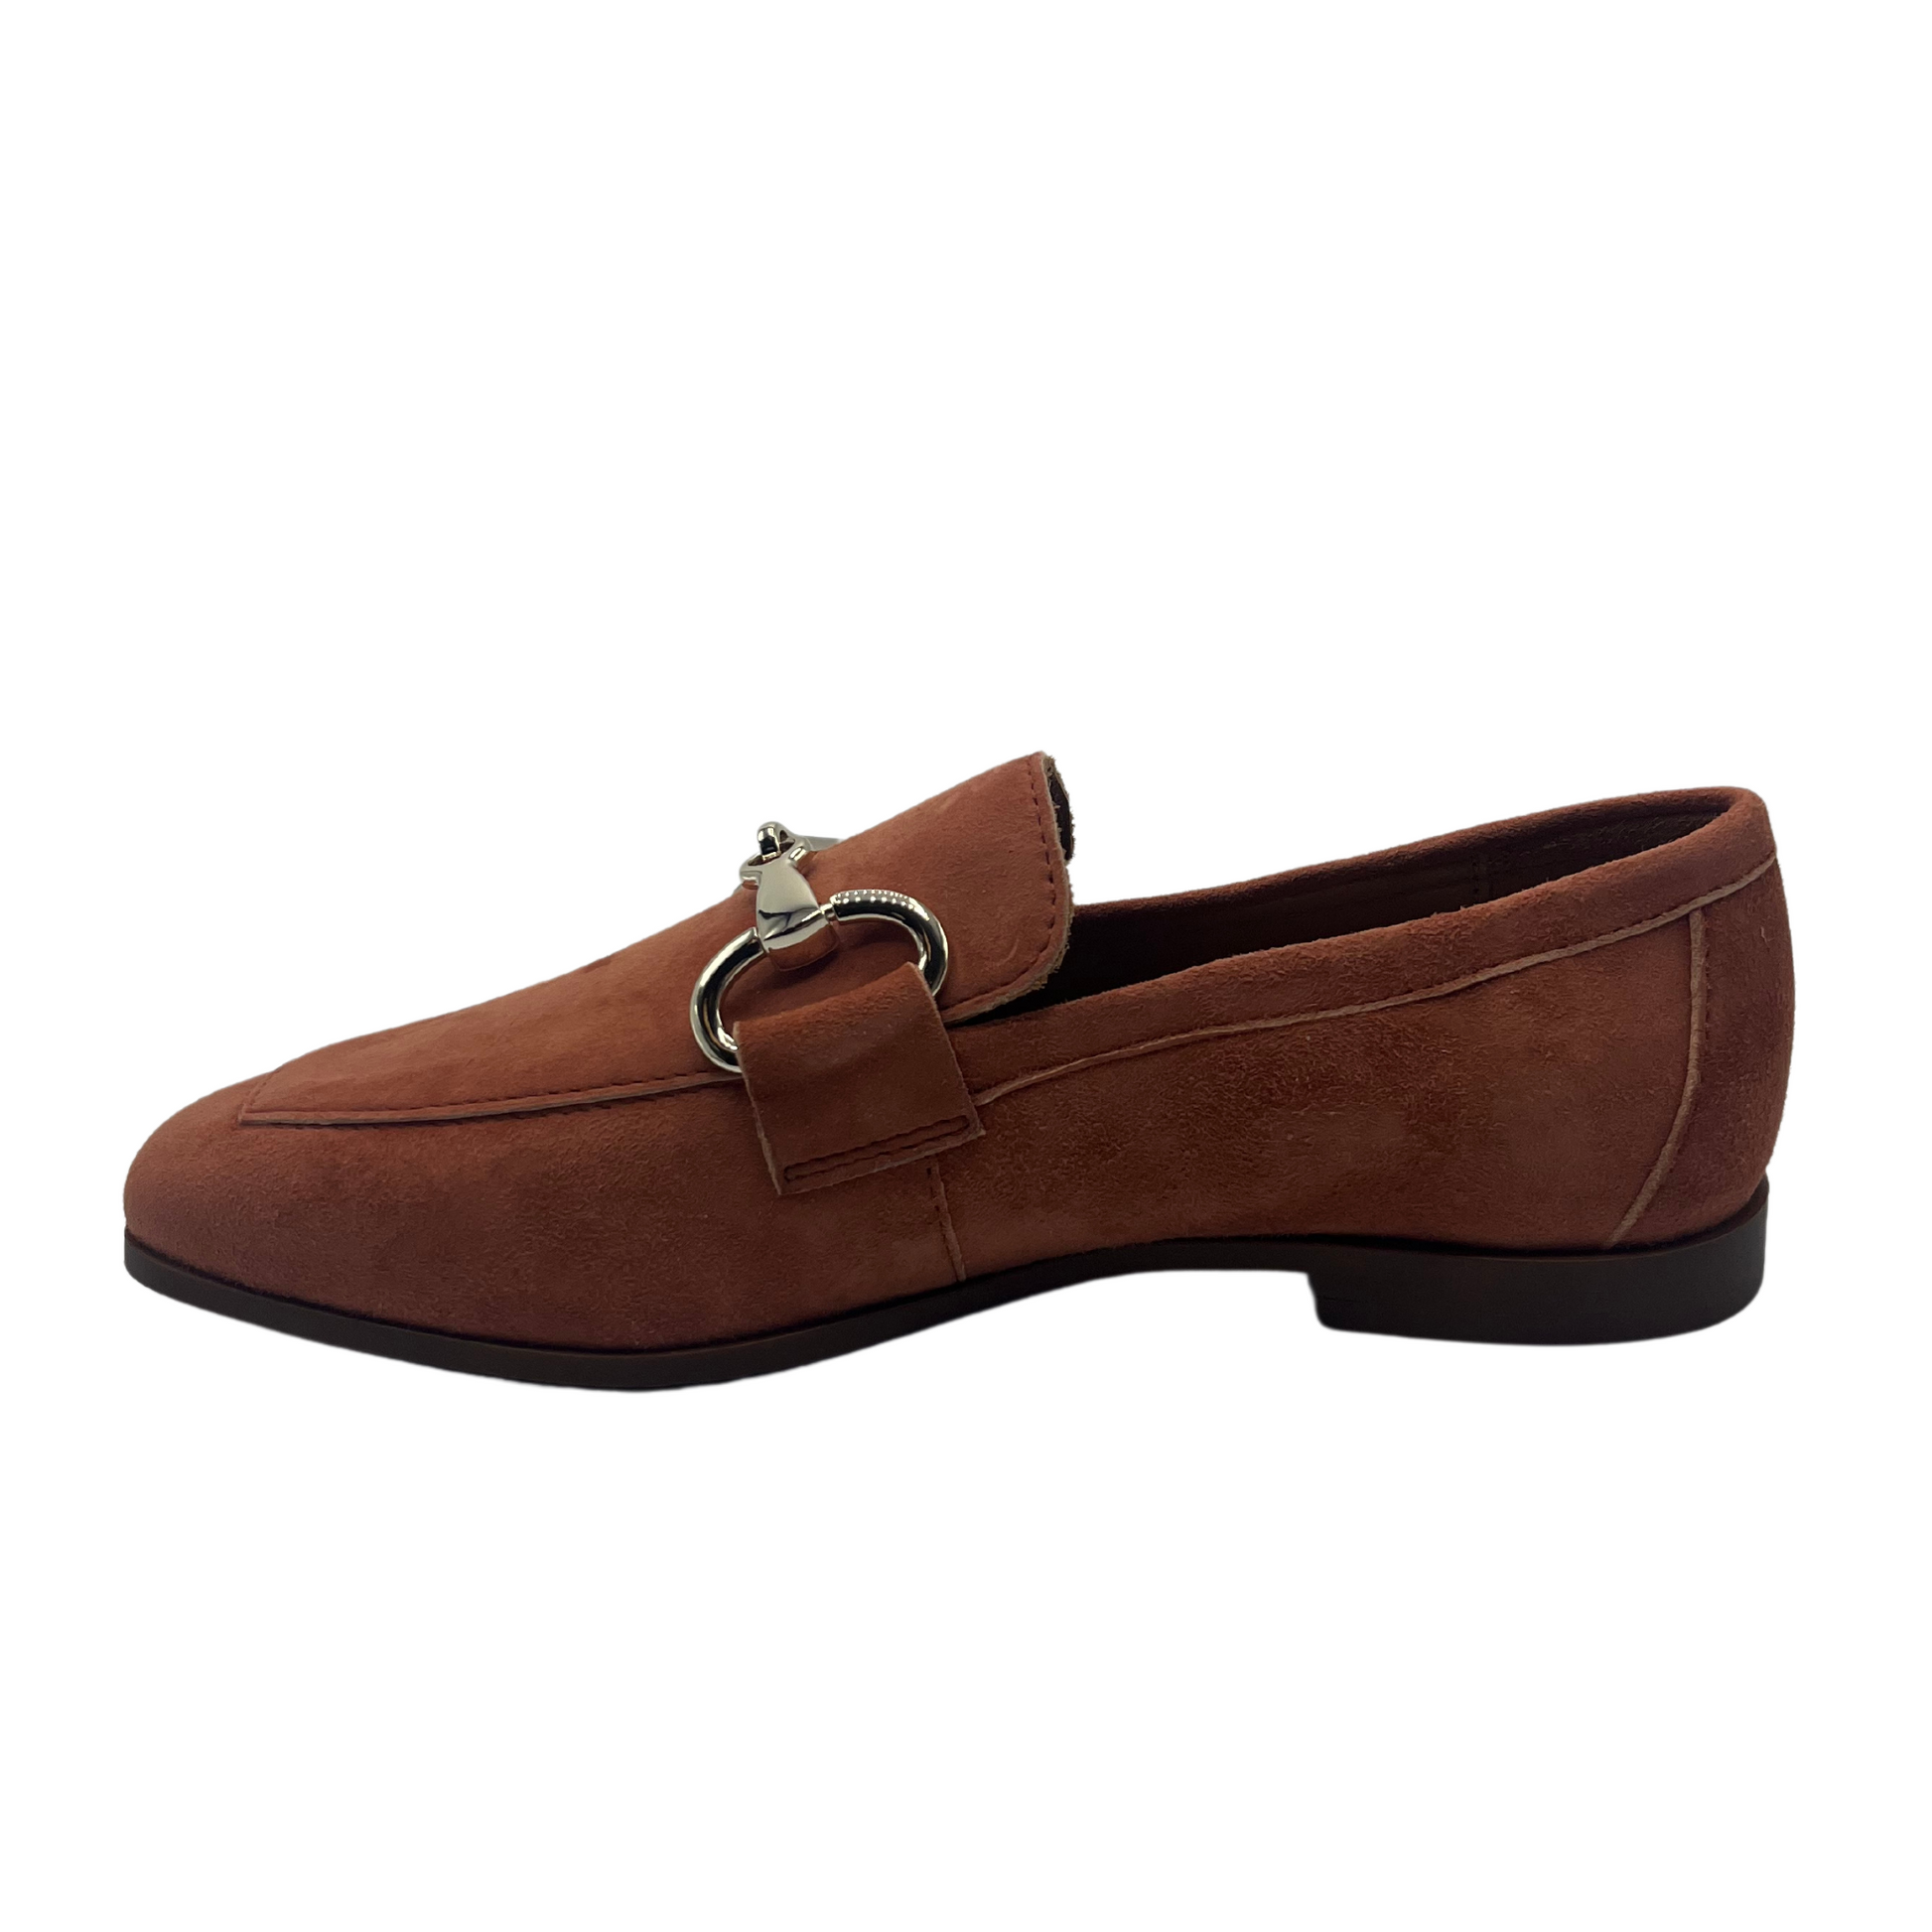 Left facing view of red brown suede loafer with silver bit detail on upper, square toe and low heel